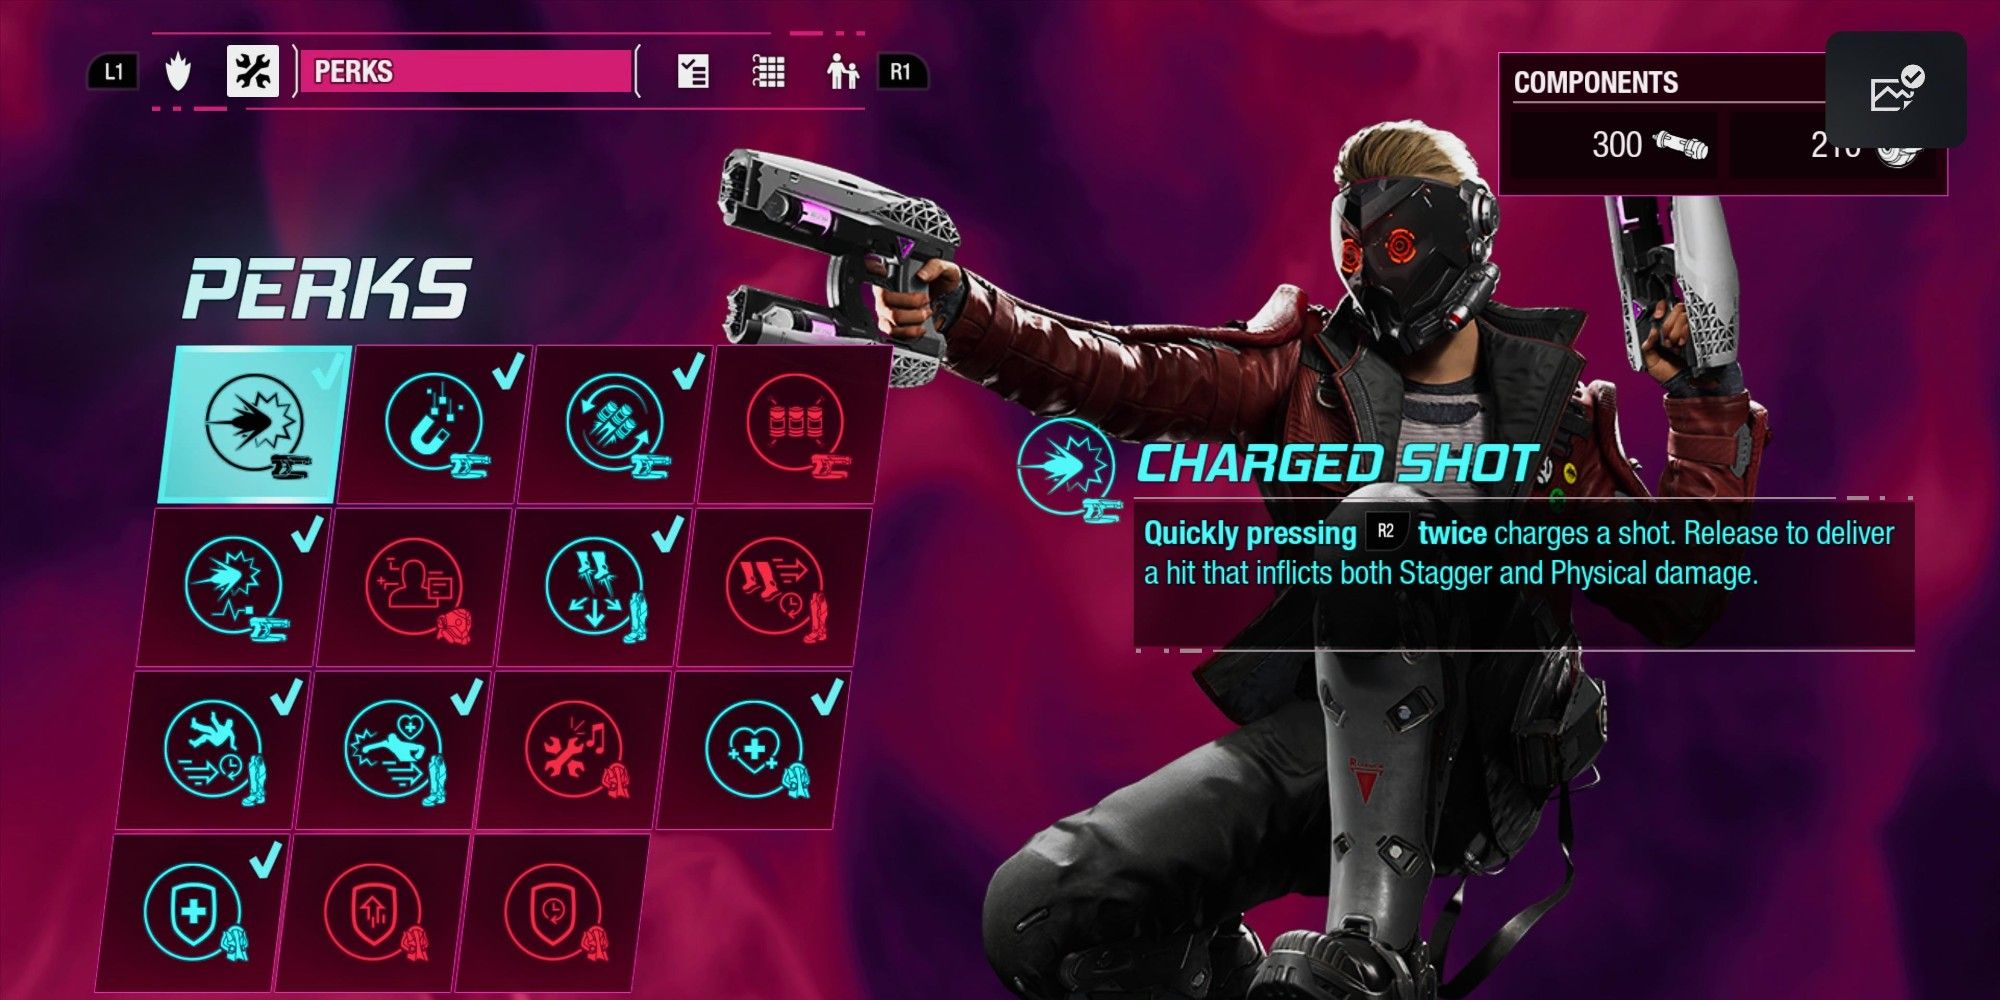 the charged shot perk on the perks screen